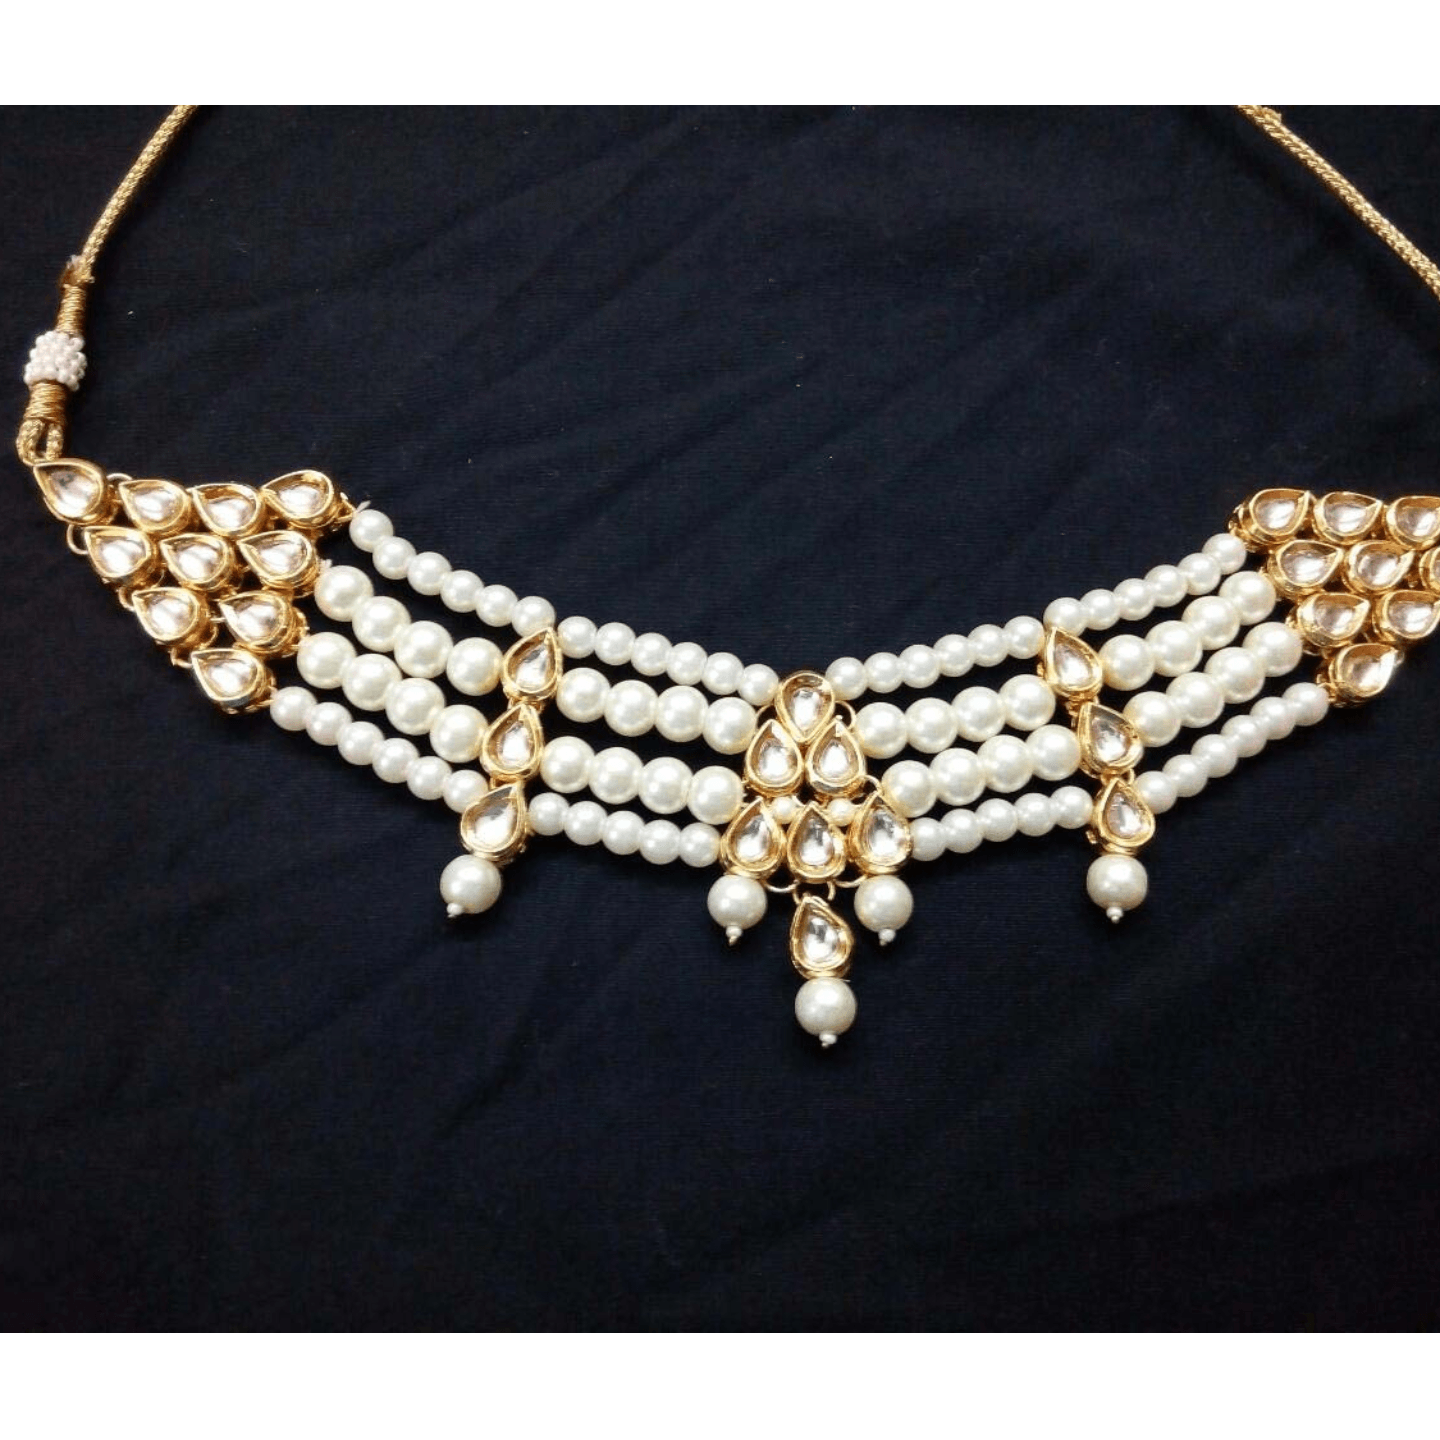 Gold Tone Kundan Necklace With White Onyx Pearls